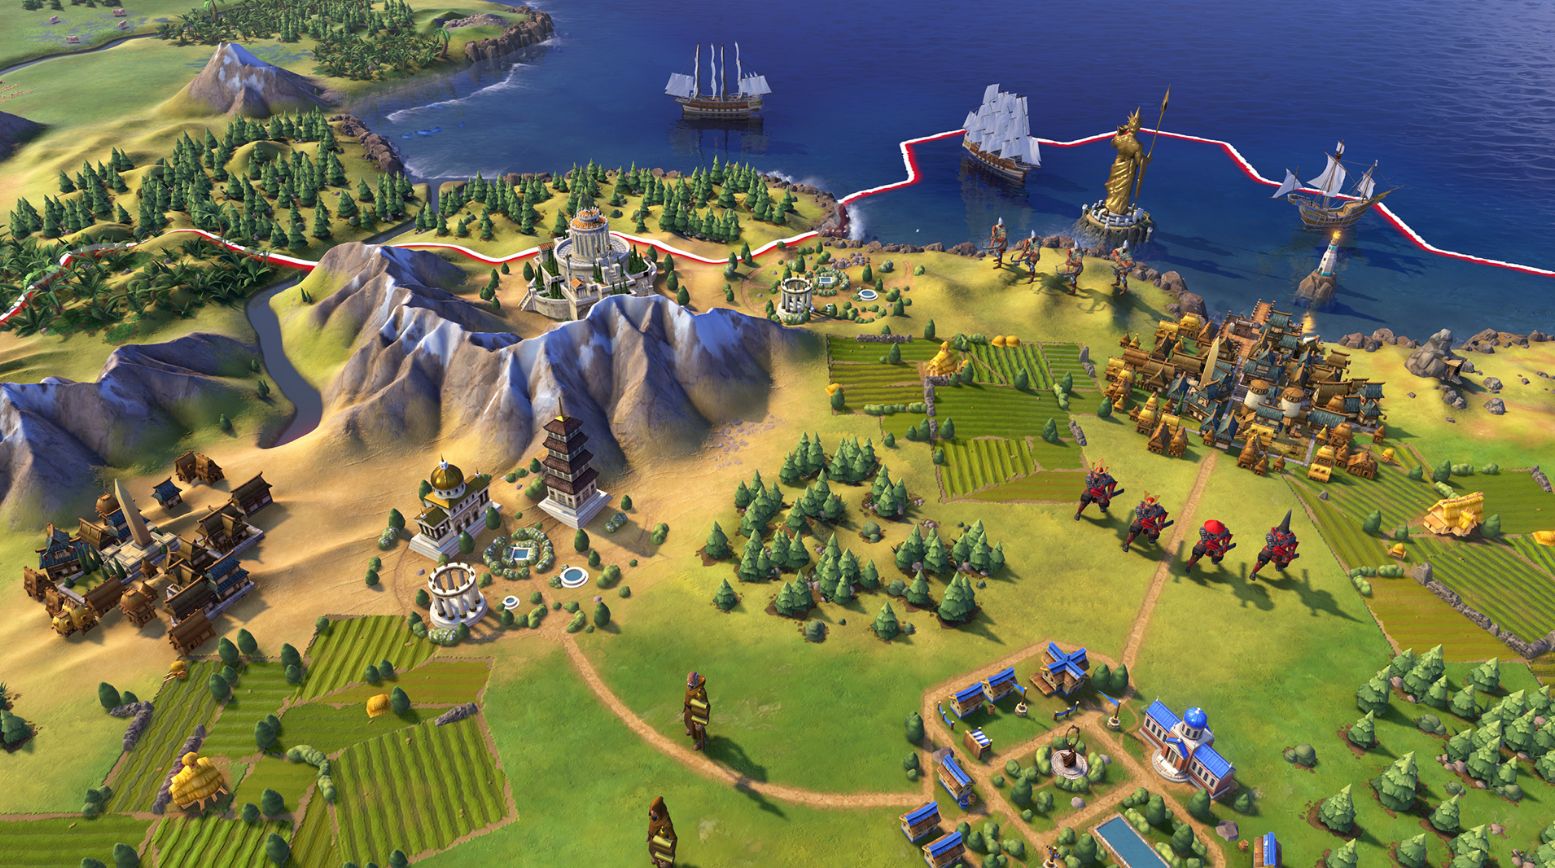 Image for Civilization 6 loading woes: here's how to stop the game freezing on the now loading screen